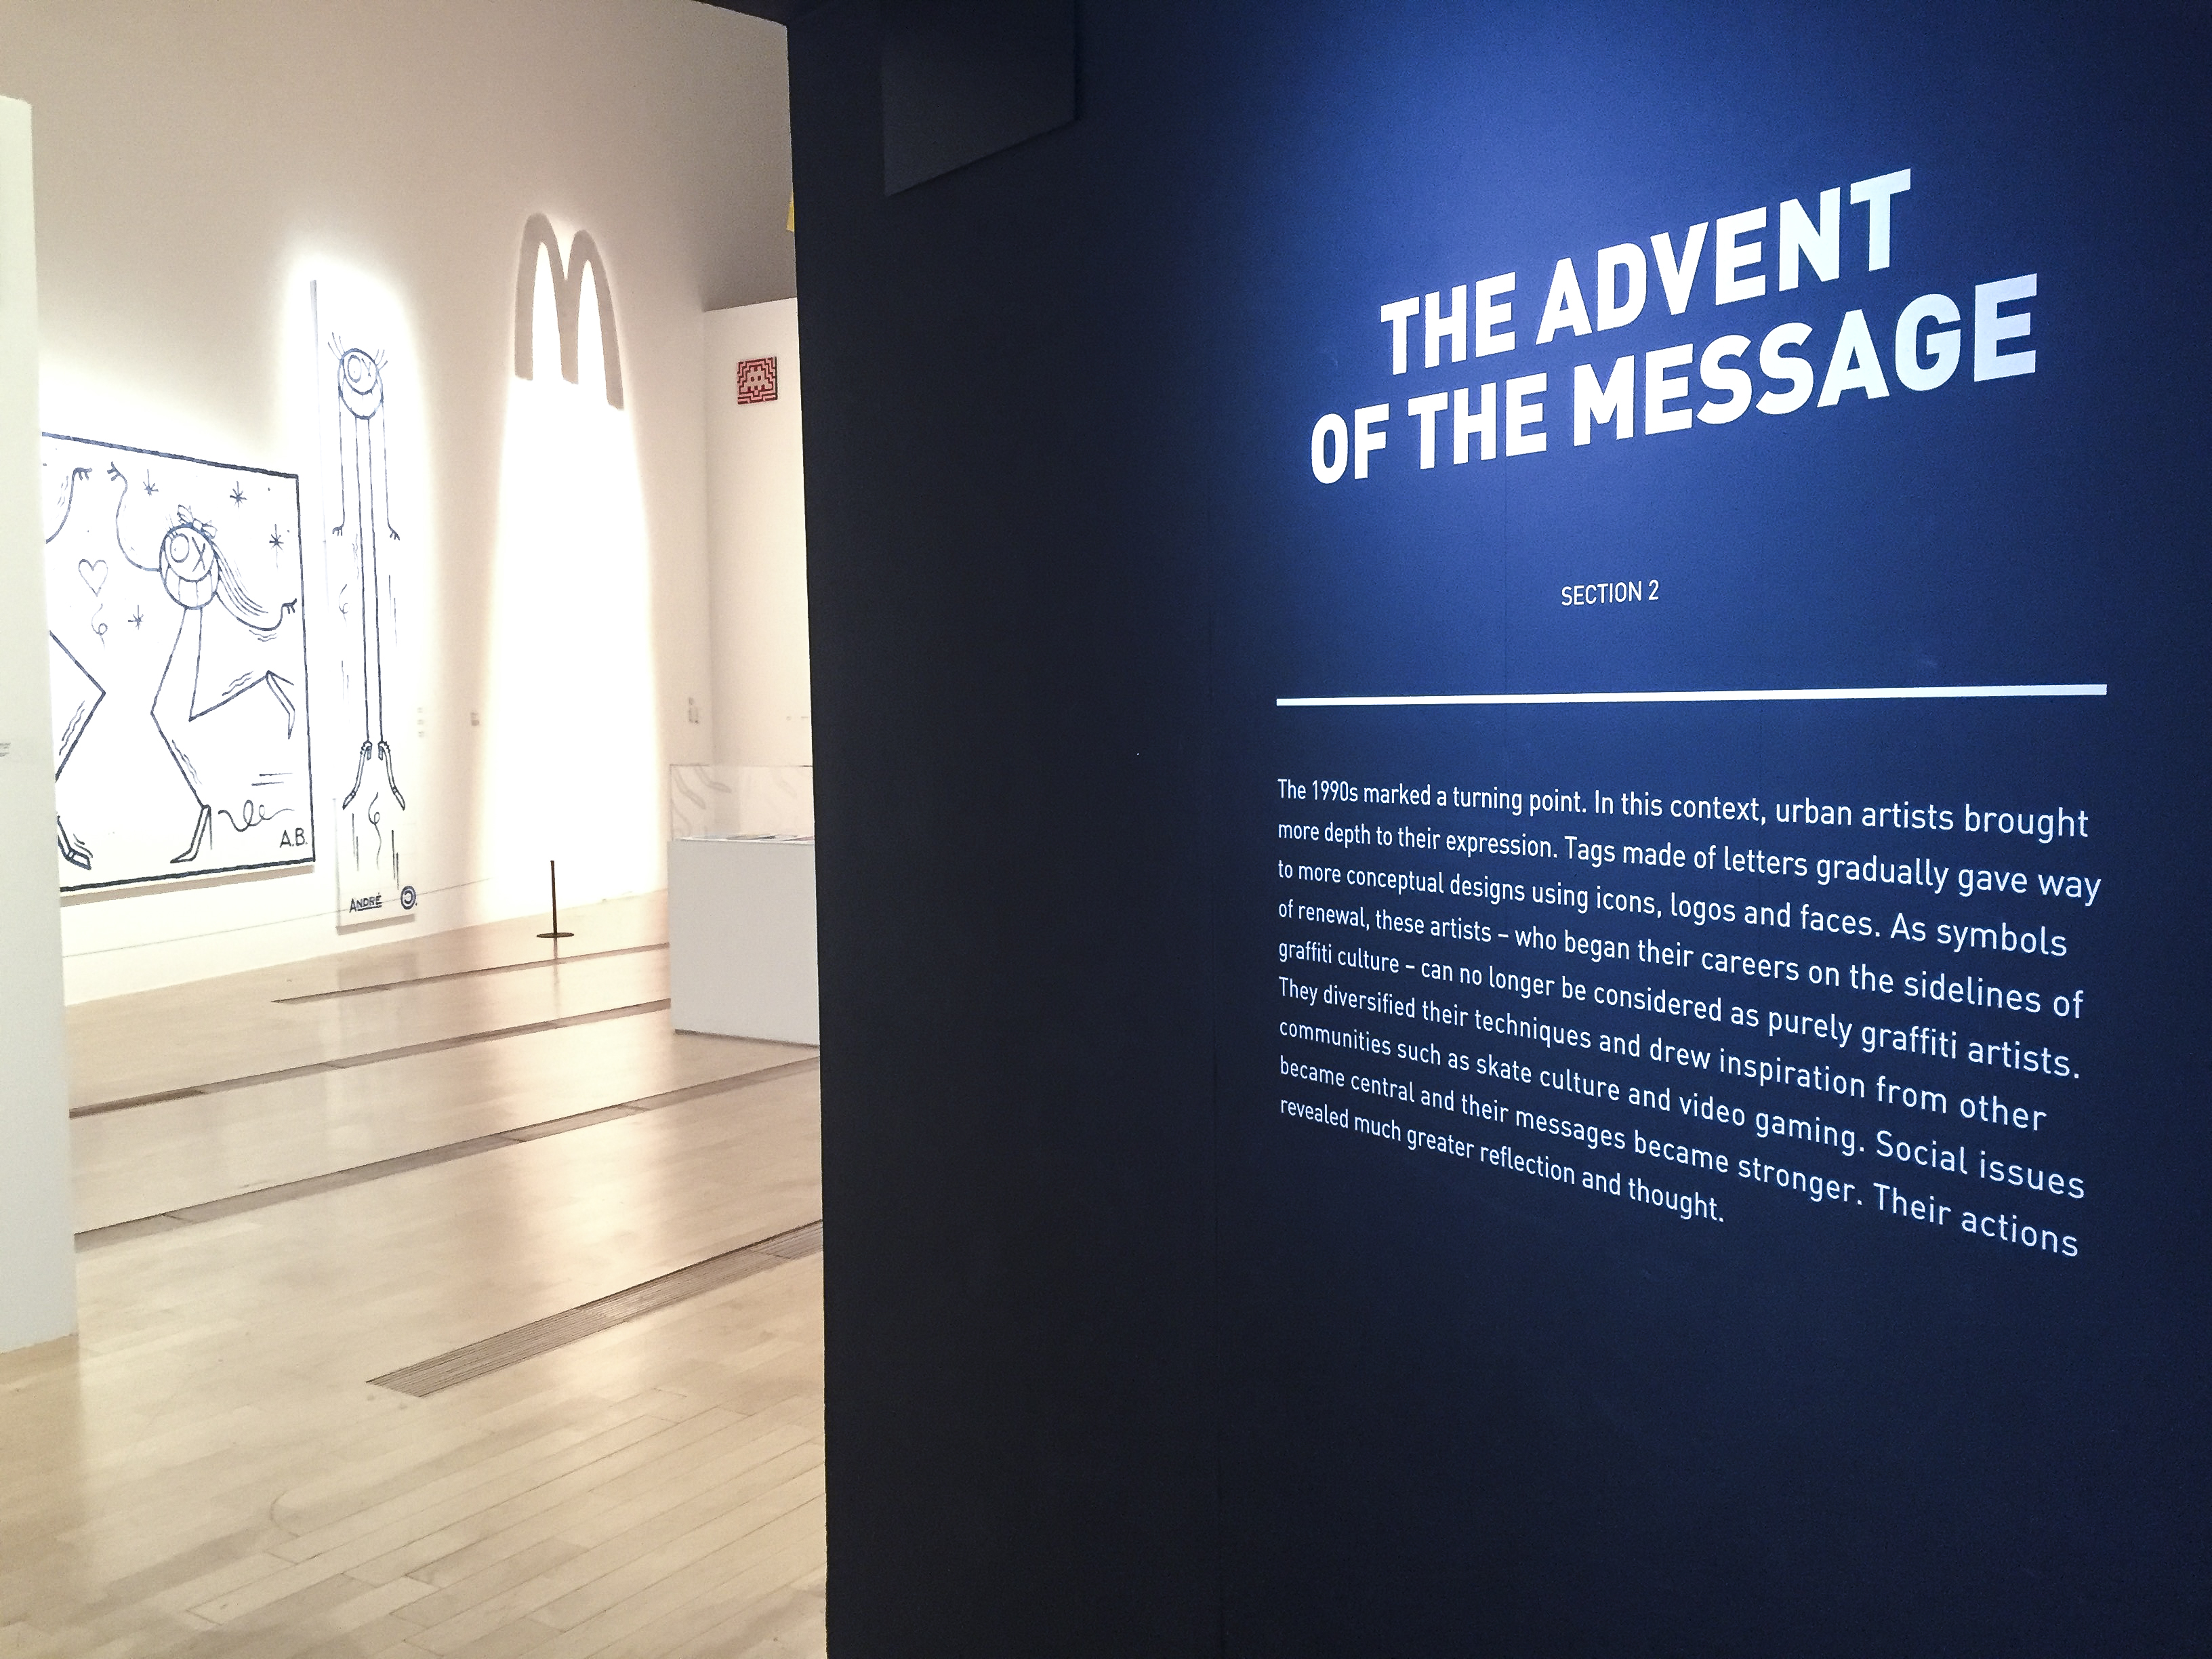 The Advent of the Message at Art From the Streets exhibition at the ArtScience Museum, Singapore.